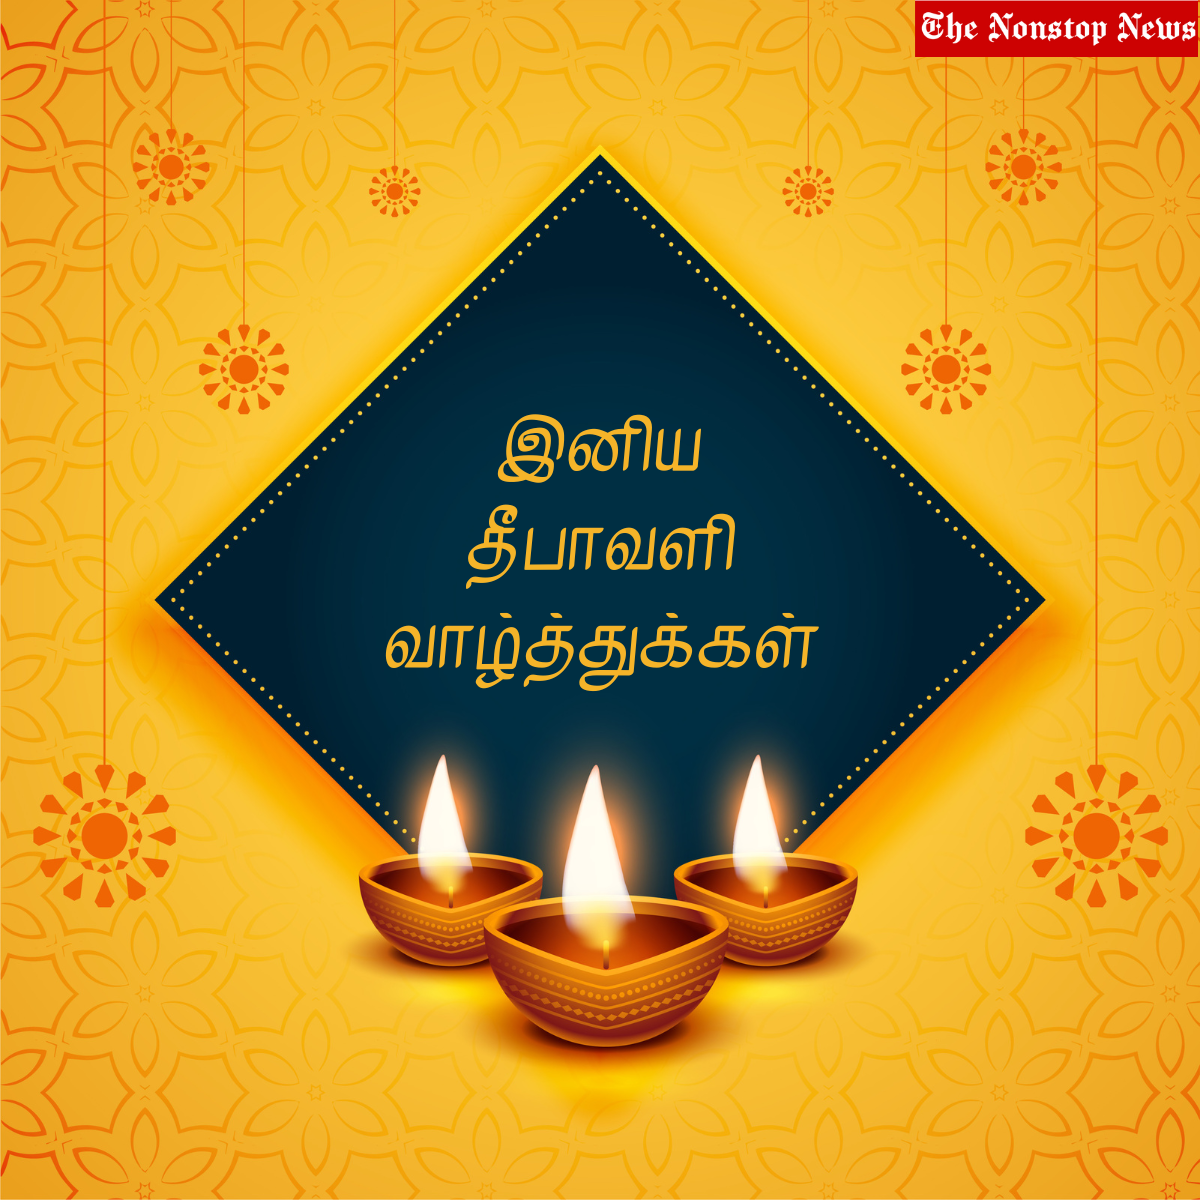 Diwali 2022 Quotes, in Tamil and Malayalam, Messages, Wishes, Greetings, Shayari, Images, and Posters For WhatsApp